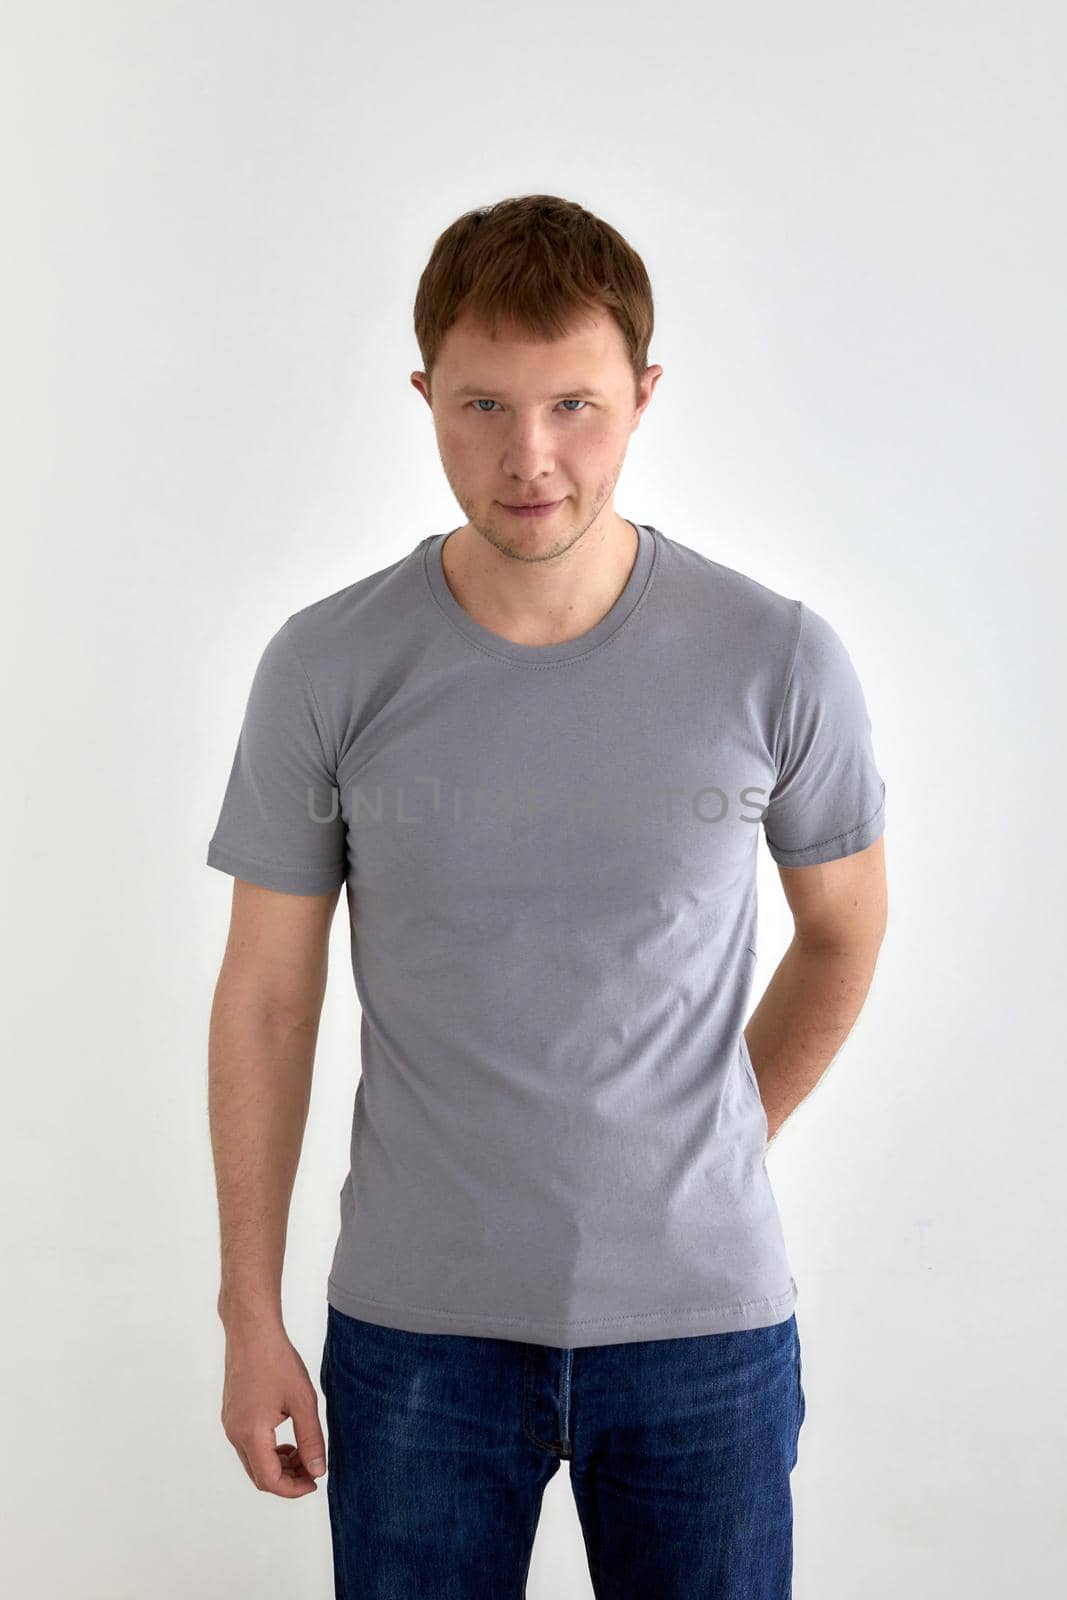 Positive young man in casual outfit standing on gray background by Demkat